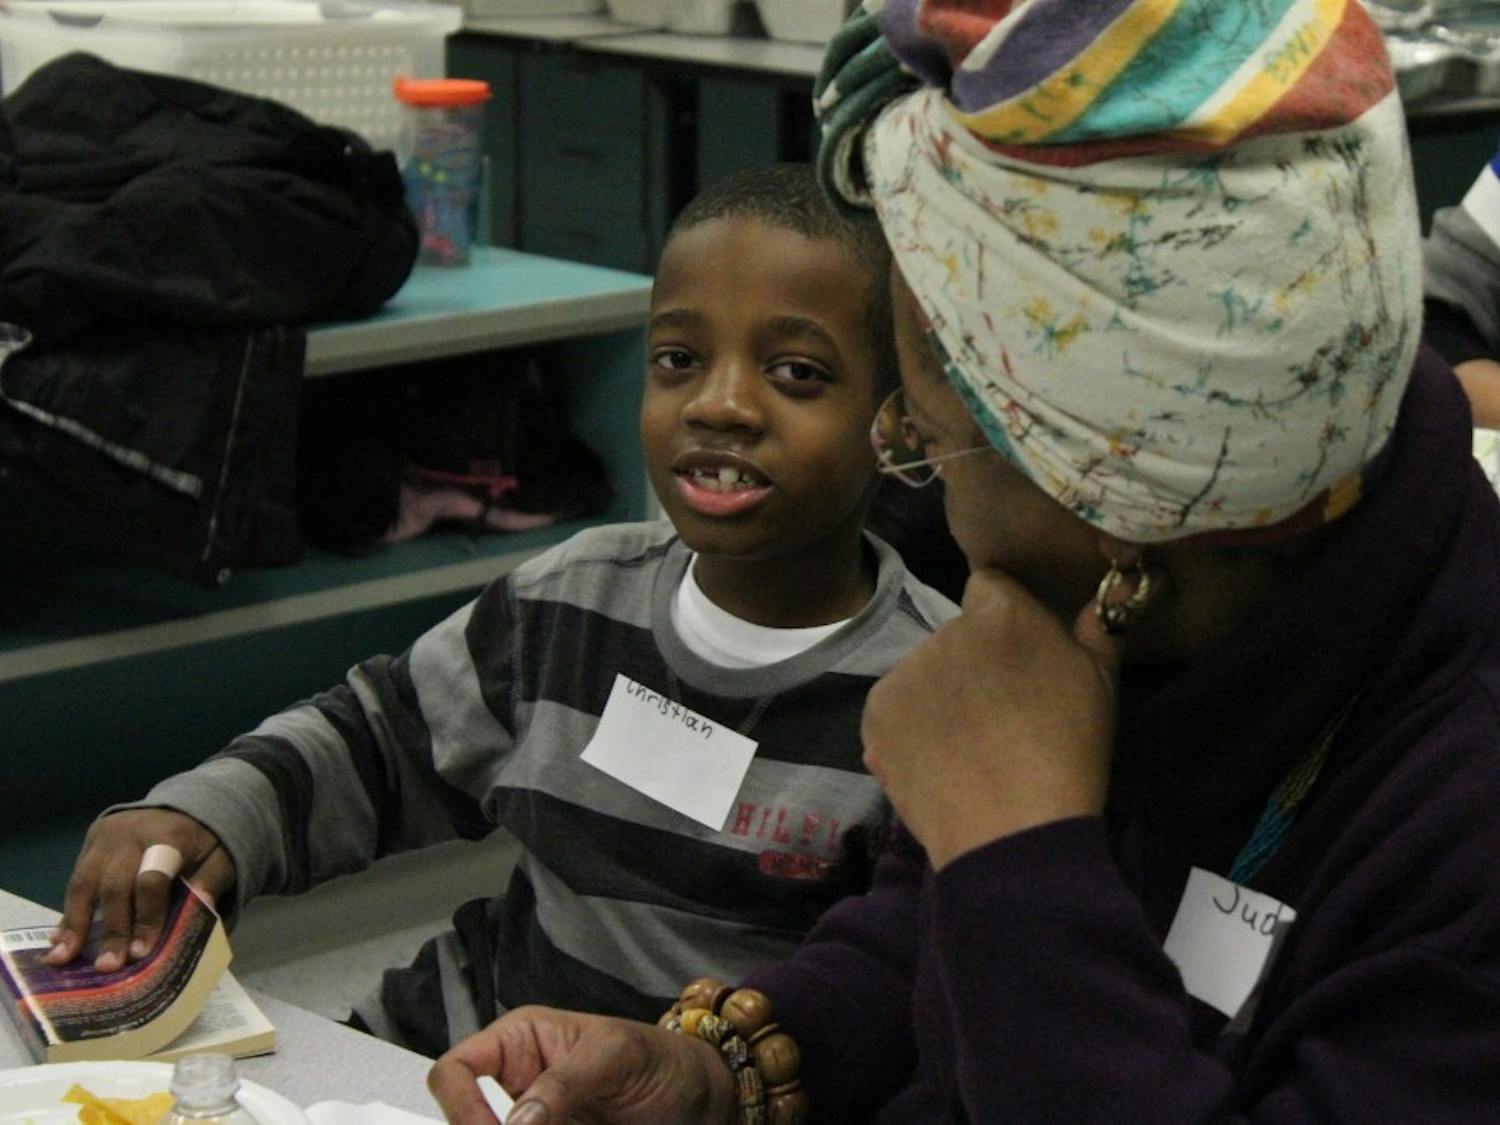 Christian and his mom talk get ready to read during McDougle Elementary School's first Family Reading Partners program event.